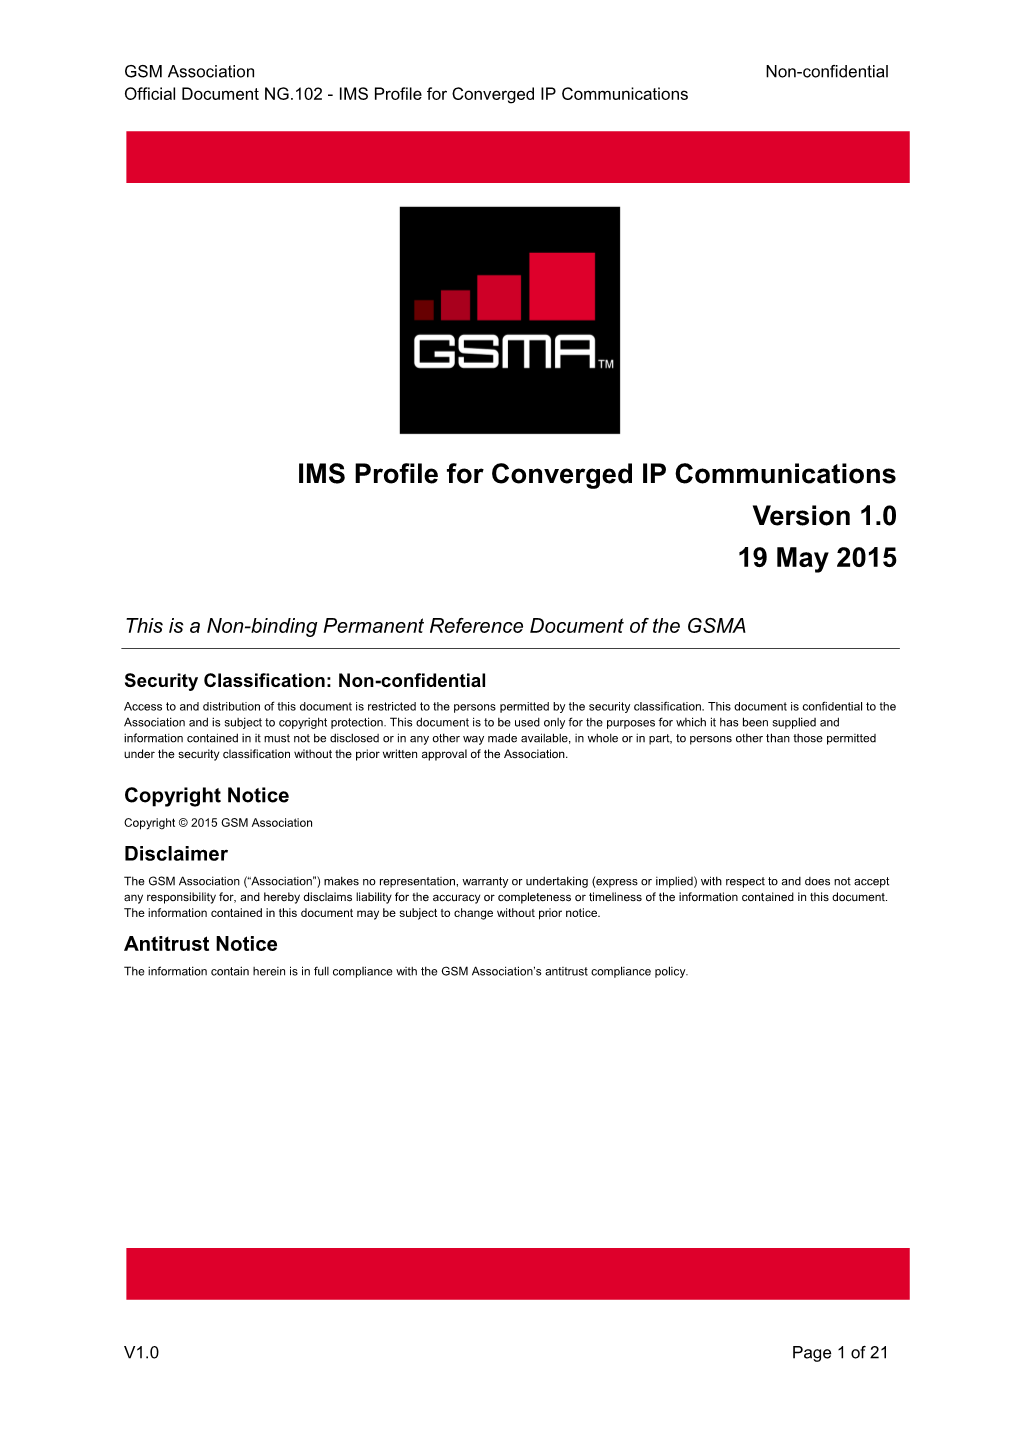 IMS Profile for Converged IP Communications Version 1.0 19 May 2015